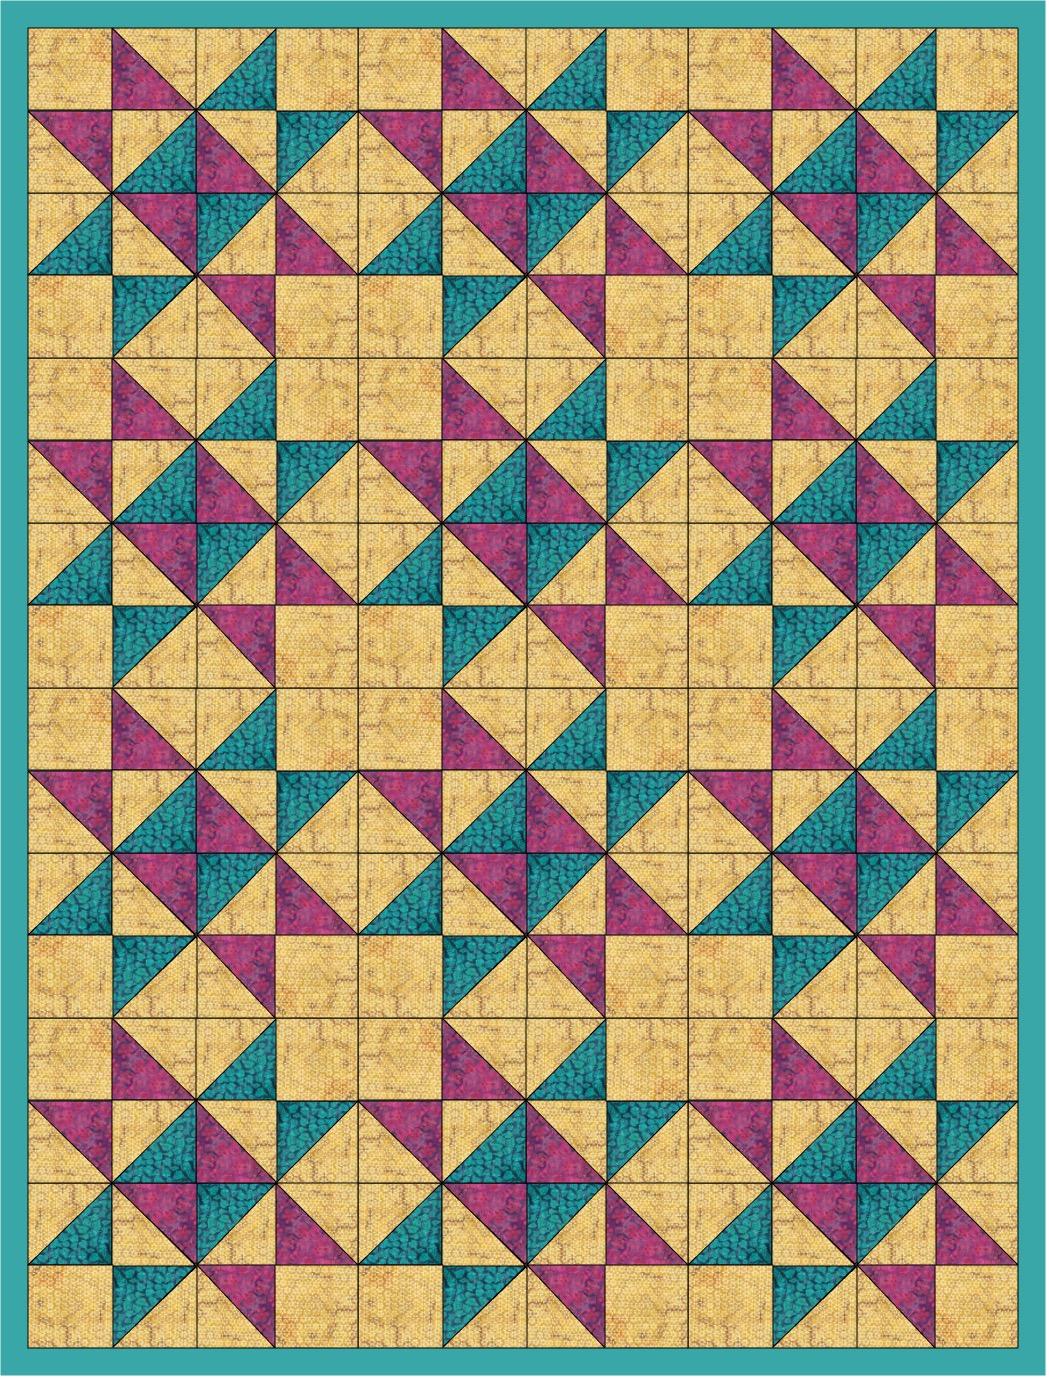 Quiltblox - Over and Under - Savannah - Colorway 4